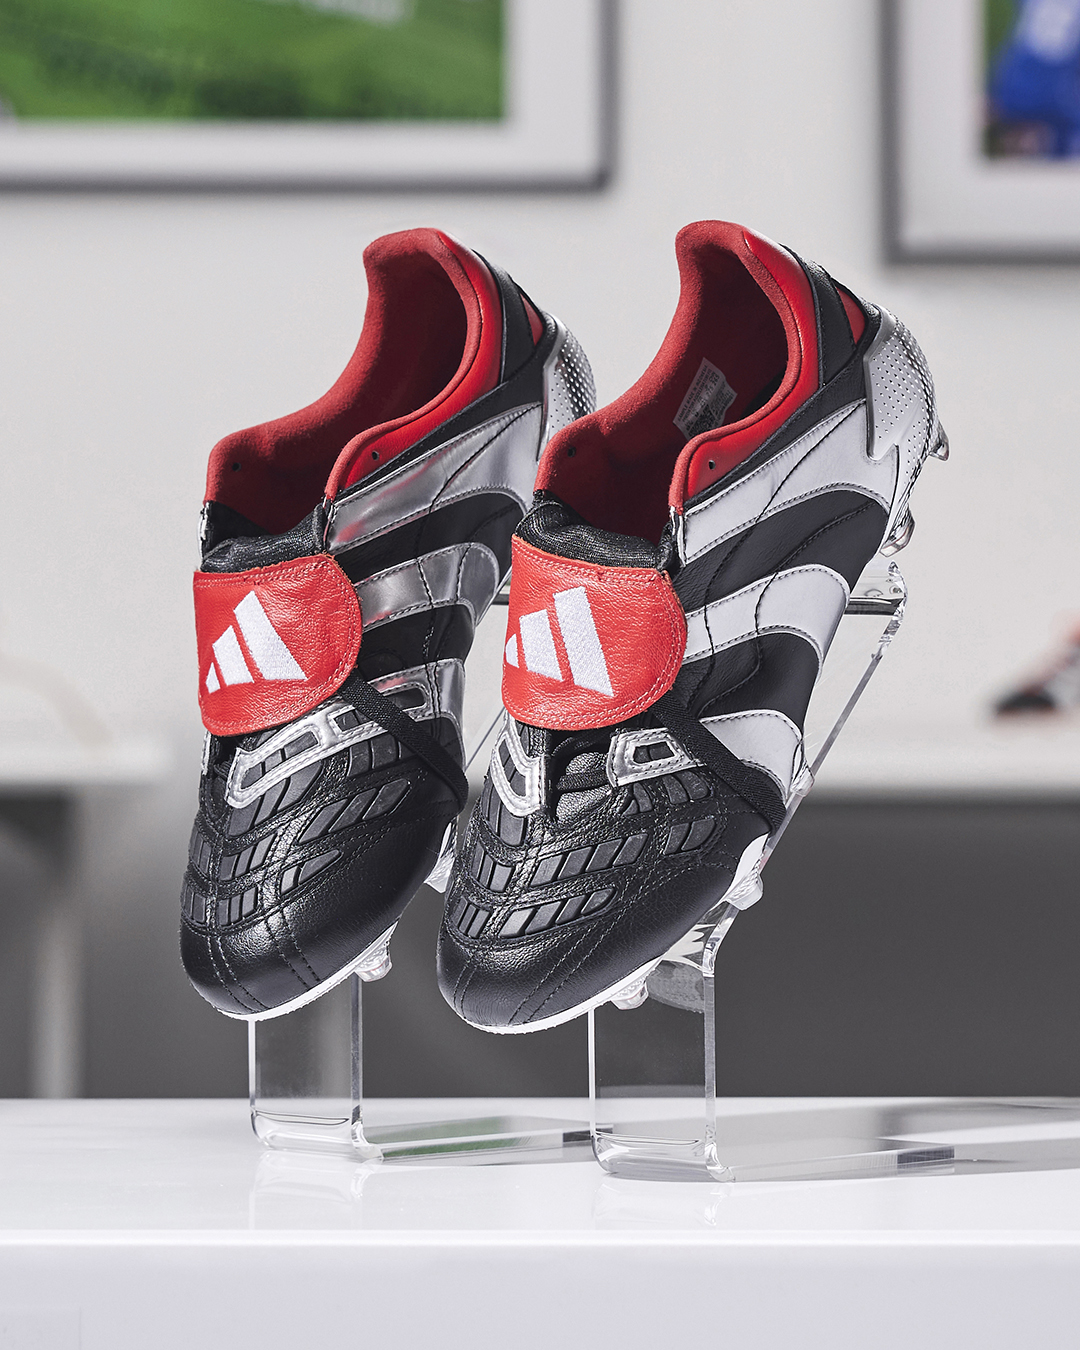 Laag Klusjesman zij is Pro:Direct Soccer on Twitter: "A Pro:Direct Soccer World Exclusive 🔥 Just  998 pairs of the adidas Predator Accelerator x Pro:Direct Soccer 25th  Anniversary football boots will be available on our UK (App